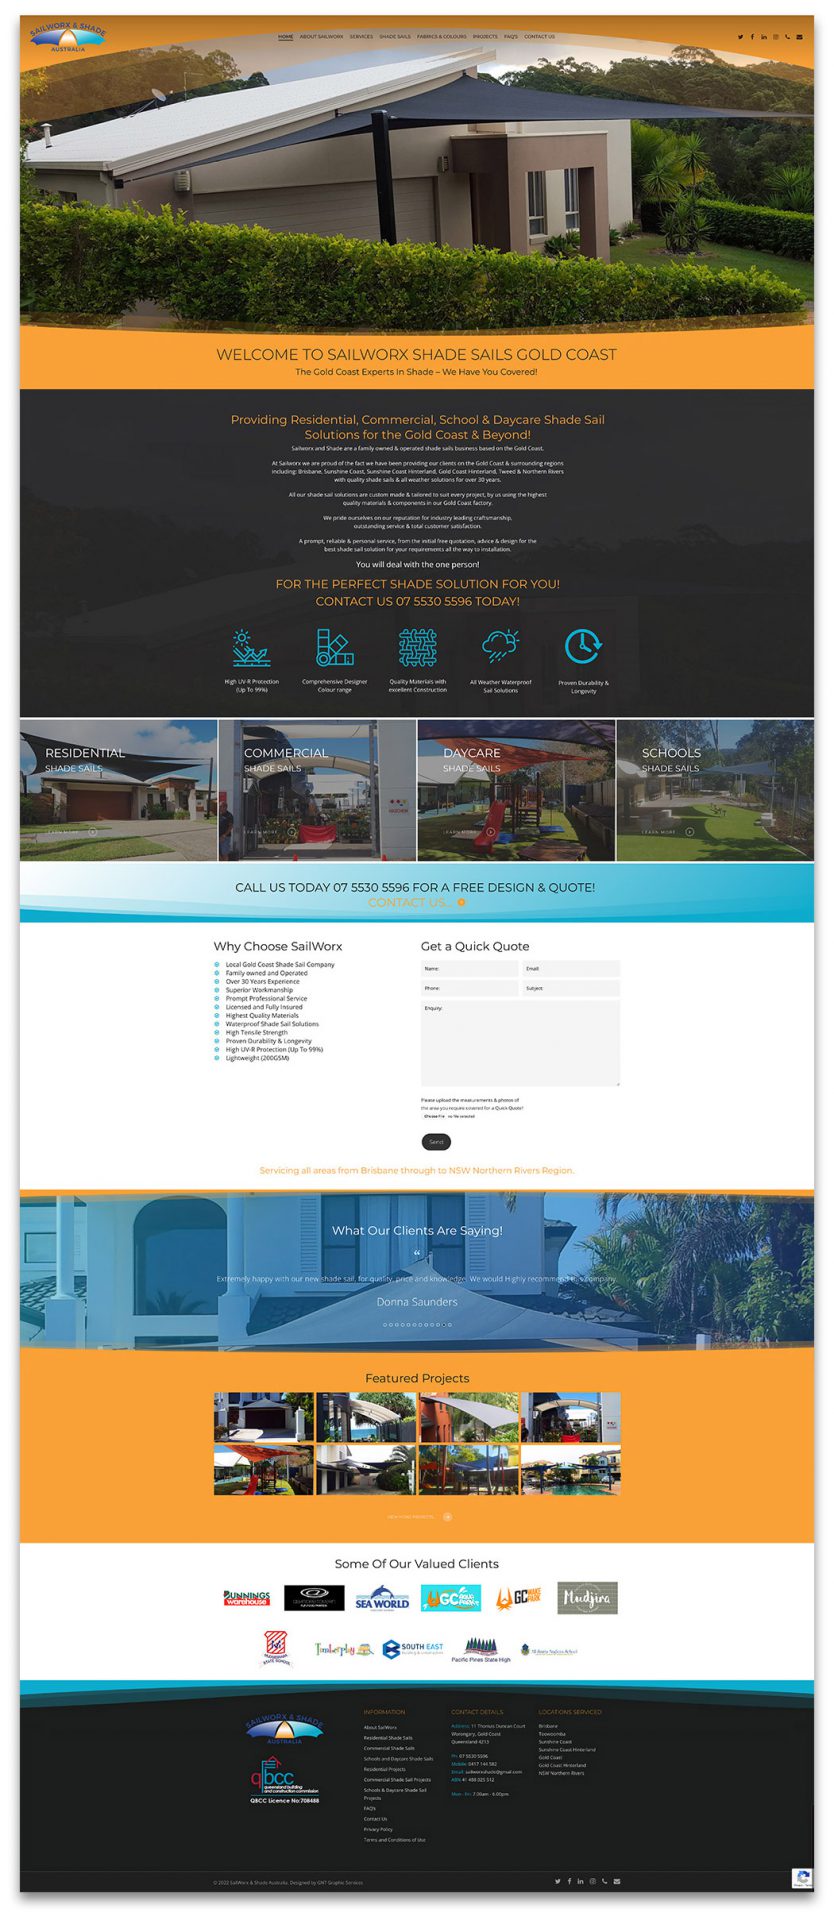 Sailworx Shade Sails Website deigned & built by GNT Graphic Services